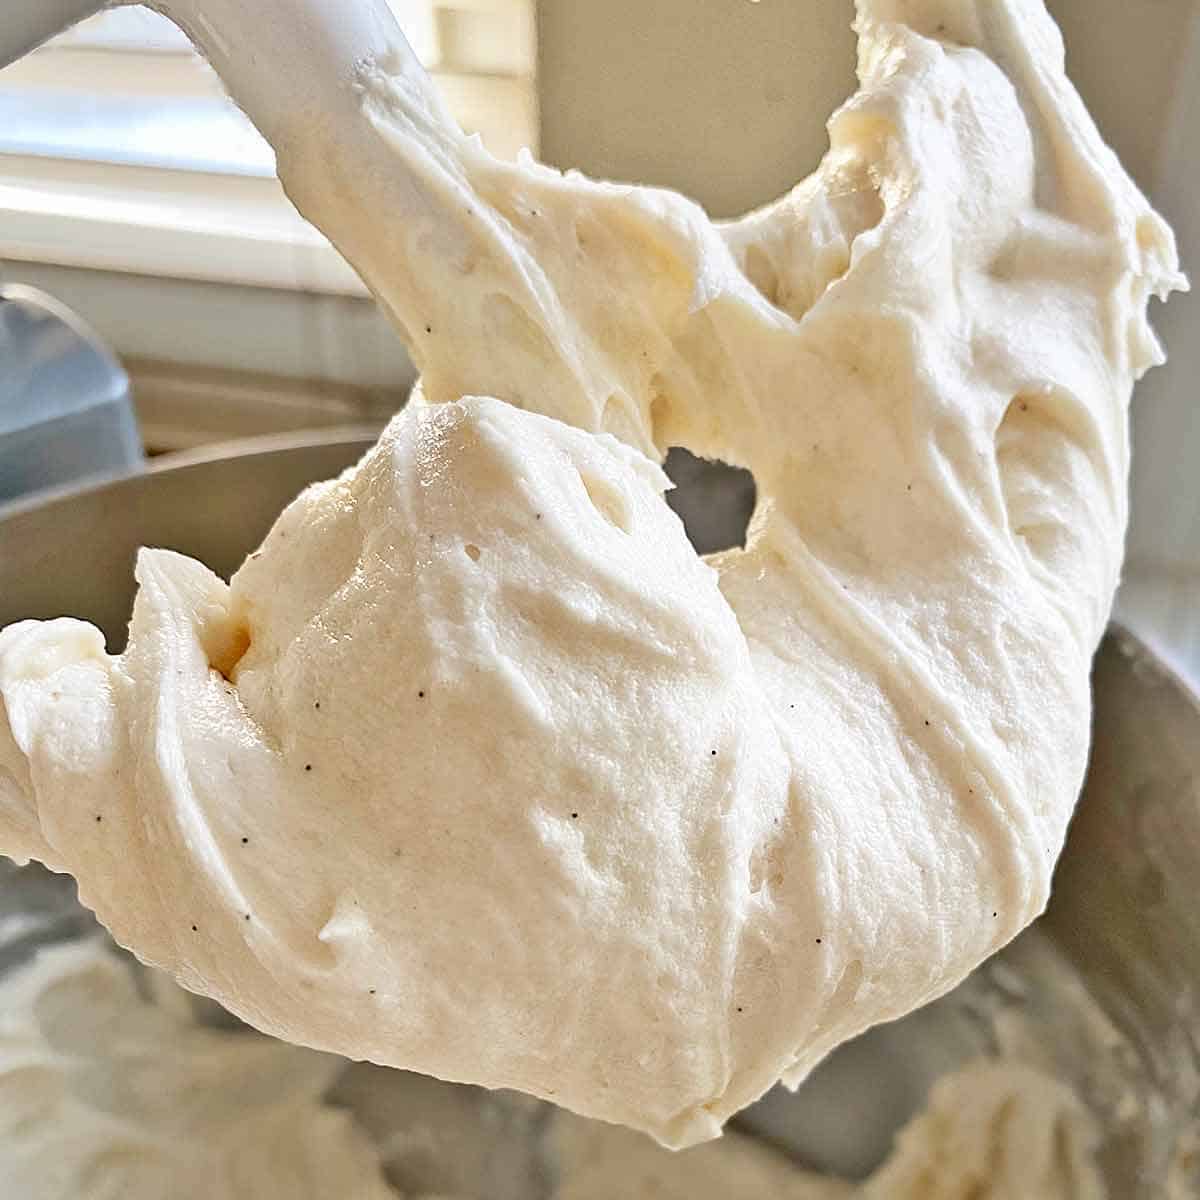 The beater attachment of an electric mixer lifted up and covered with homemade vanilla bean buttercream frosting.